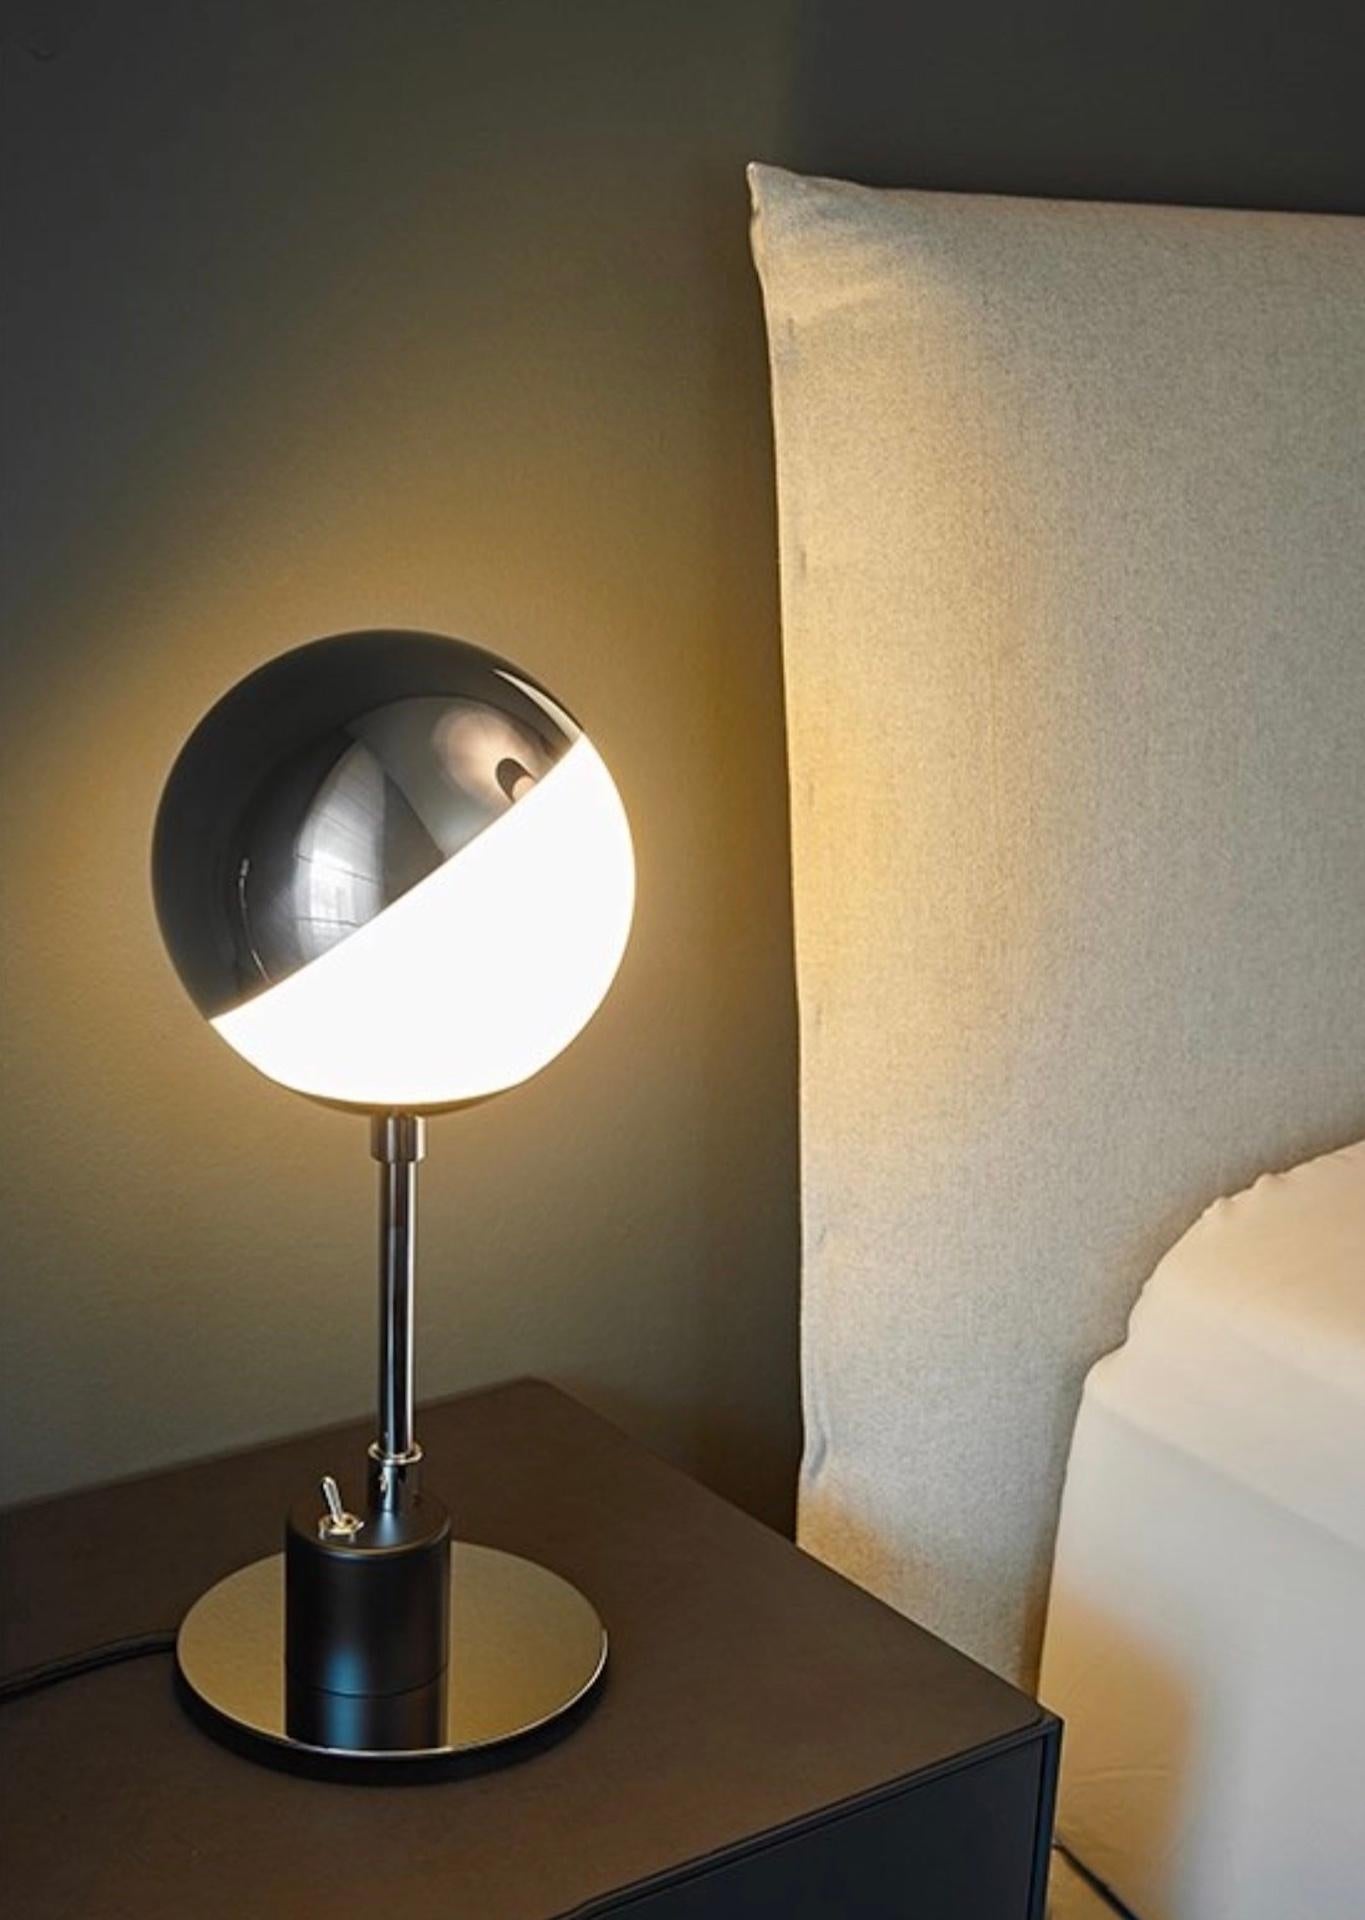 This lamp design was developed by a group of architects from the Swedish functionalist movement, which emerged at the same time as the Bauhaus era. A similar lamp was produced by Gispen in the Netherlands at the same time – once again, a hemisphere